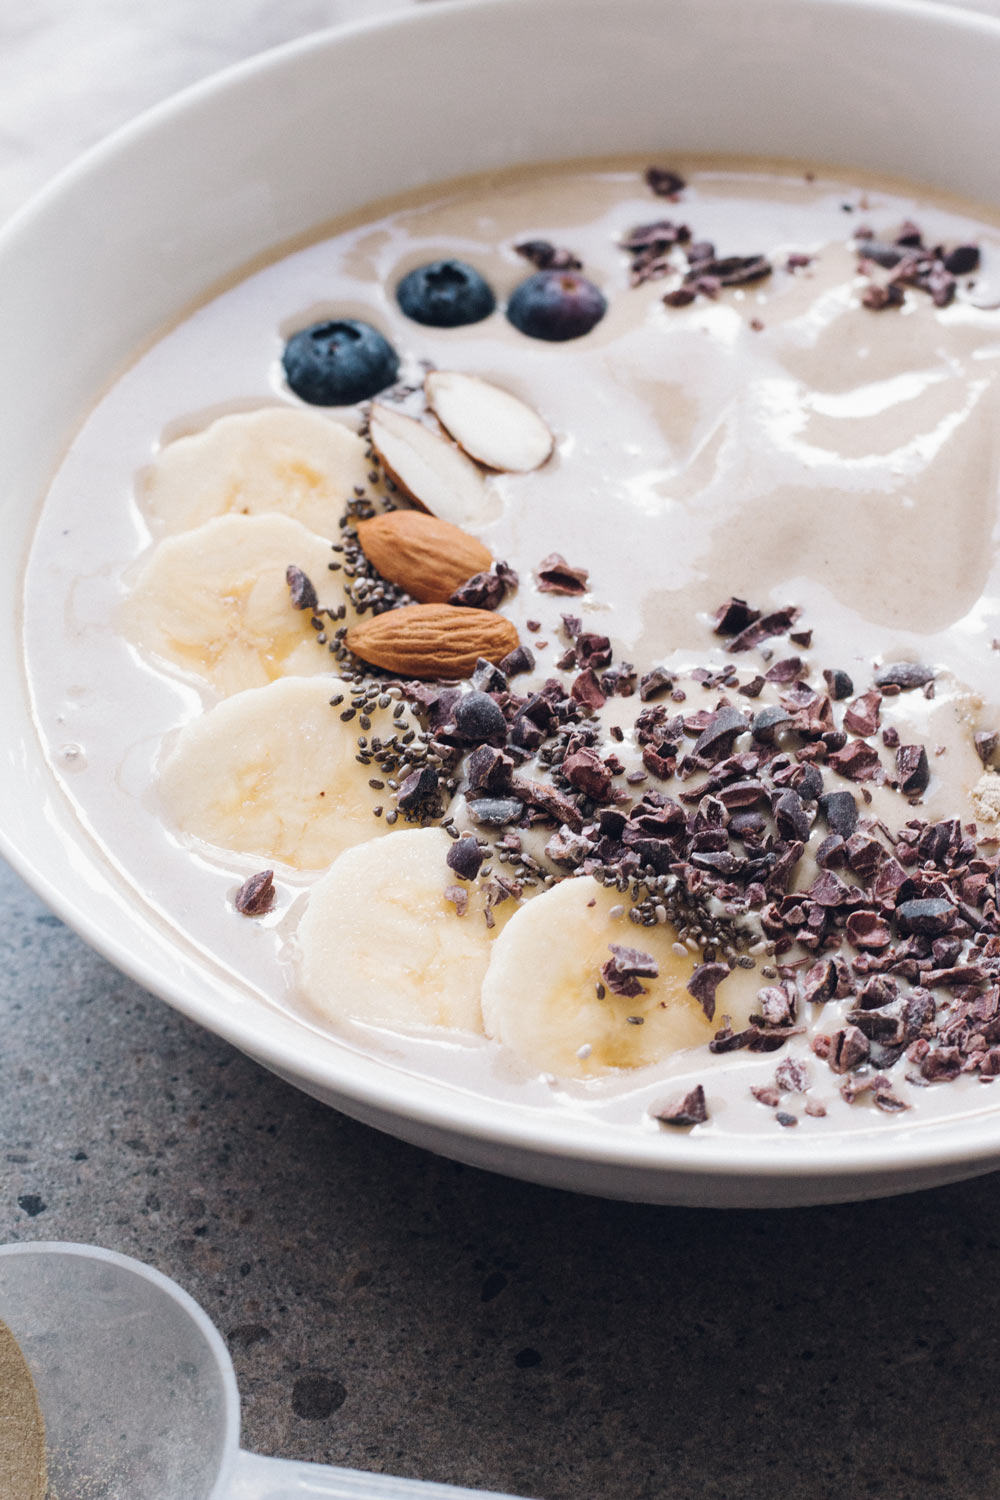 Post Workout Recovery Protein Smoothie Bowl